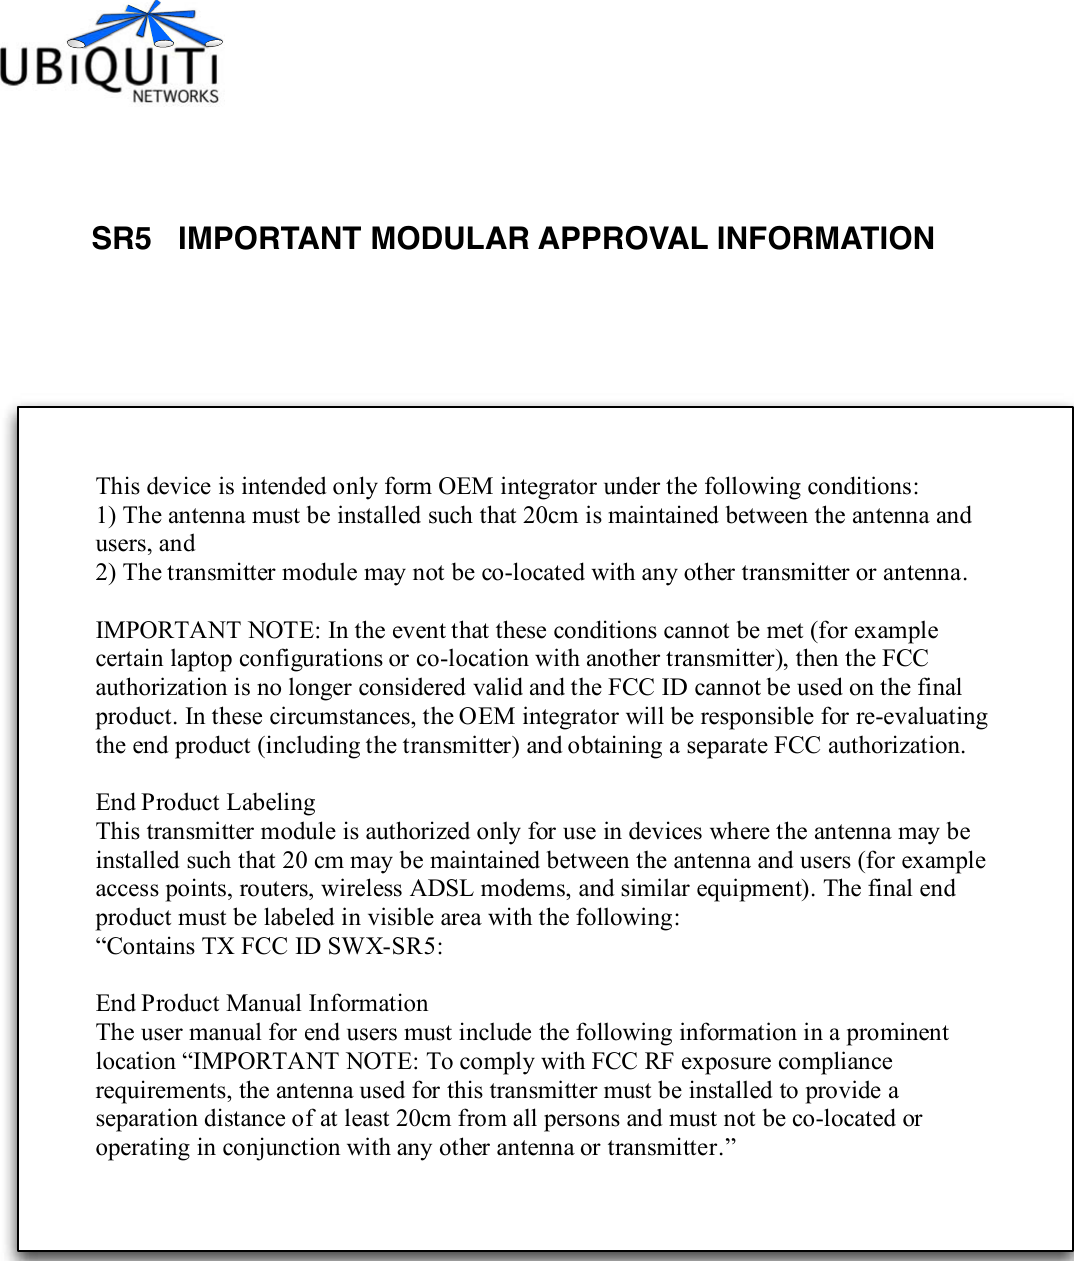 SR5   IMPORTANT MODULAR APPROVAL INFORMATION This device is intended only form OEM integrator under the following conditions: 1) The antenna must be installed such that 20cm is maintained between the antenna and users, and 2) The transmitter module may not be co-located with any other transmitter or antenna.  IMPORTANT NOTE: In the event that these conditions cannot be met (for example certain laptop configurations or co-location with another transmitter), then the FCC authorization is no longer considered valid and the  FCC ID cannot be used on the final product. In these circumstances, the OEM integrator will be responsible for re-evaluating the end product (including the transmitter) and obtaining a separate FCC authorization.  End Product Labeling This transmitter module is authorized only for use in devices where the antenna may be installed such that 20 cm may be maintained between the antenna and users (for example access points, routers, wireless ADSL modems, and similar equipment). The final end product must be labeled in visible area with the following: “Contains TX FCC ID SWX-SR5:    End Product Manual Information The user manual for end users must include the following information in a prominent location “IMPORTANT NOTE: To comply with FCC RF exposure compliance requirements, the antenna used for this transmitter must be installed to provide a separation distance of at least 20cm from all persons and must not be co-located or operating in conjunction with any other antenna or transmitter.” 